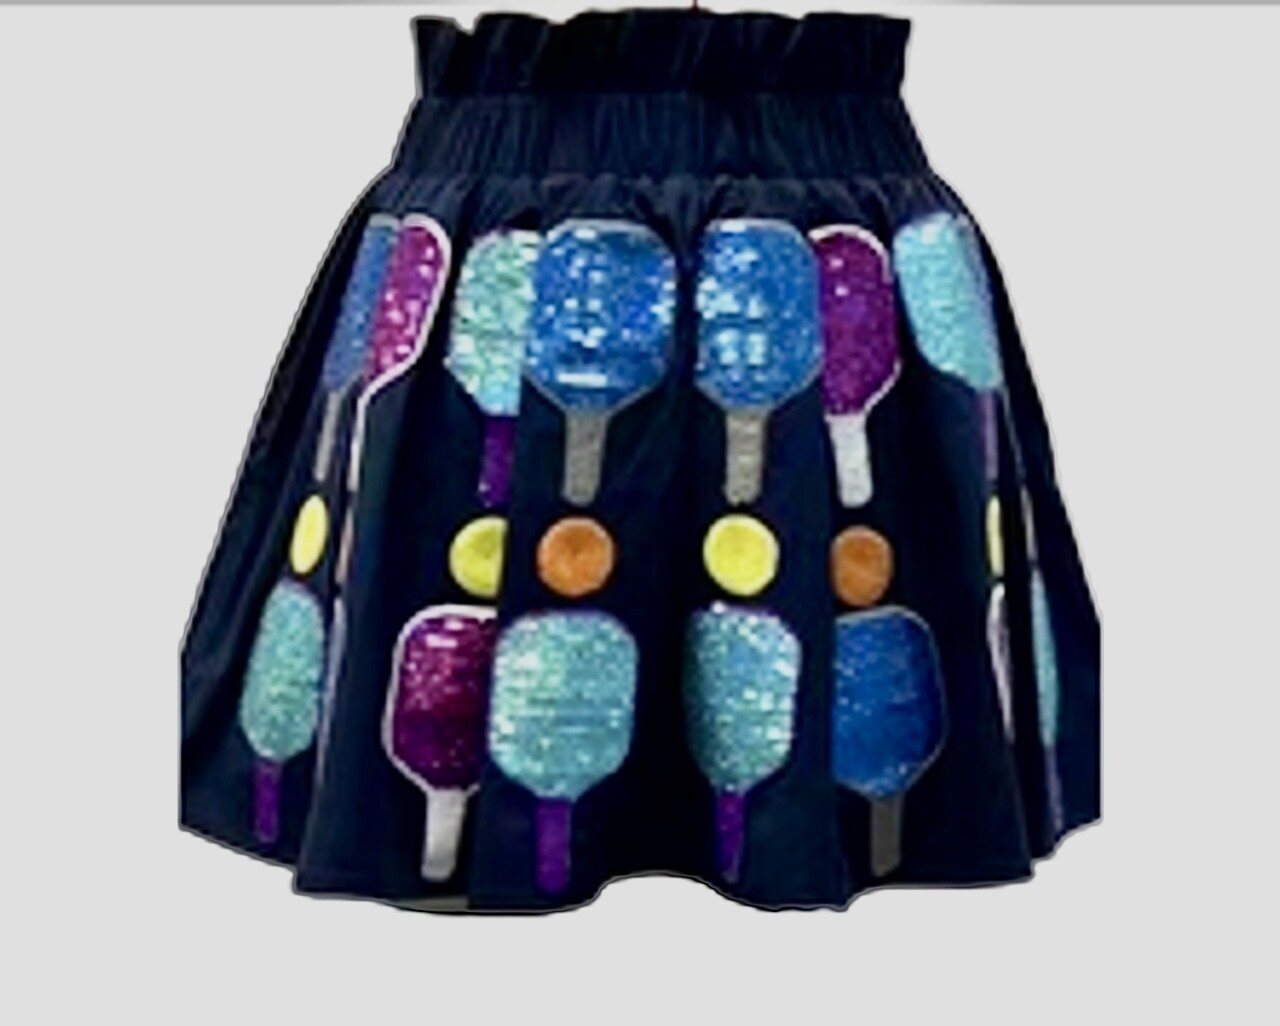 Sequined Pickle Ball Navy Skirt with Lined Shorts Size XL